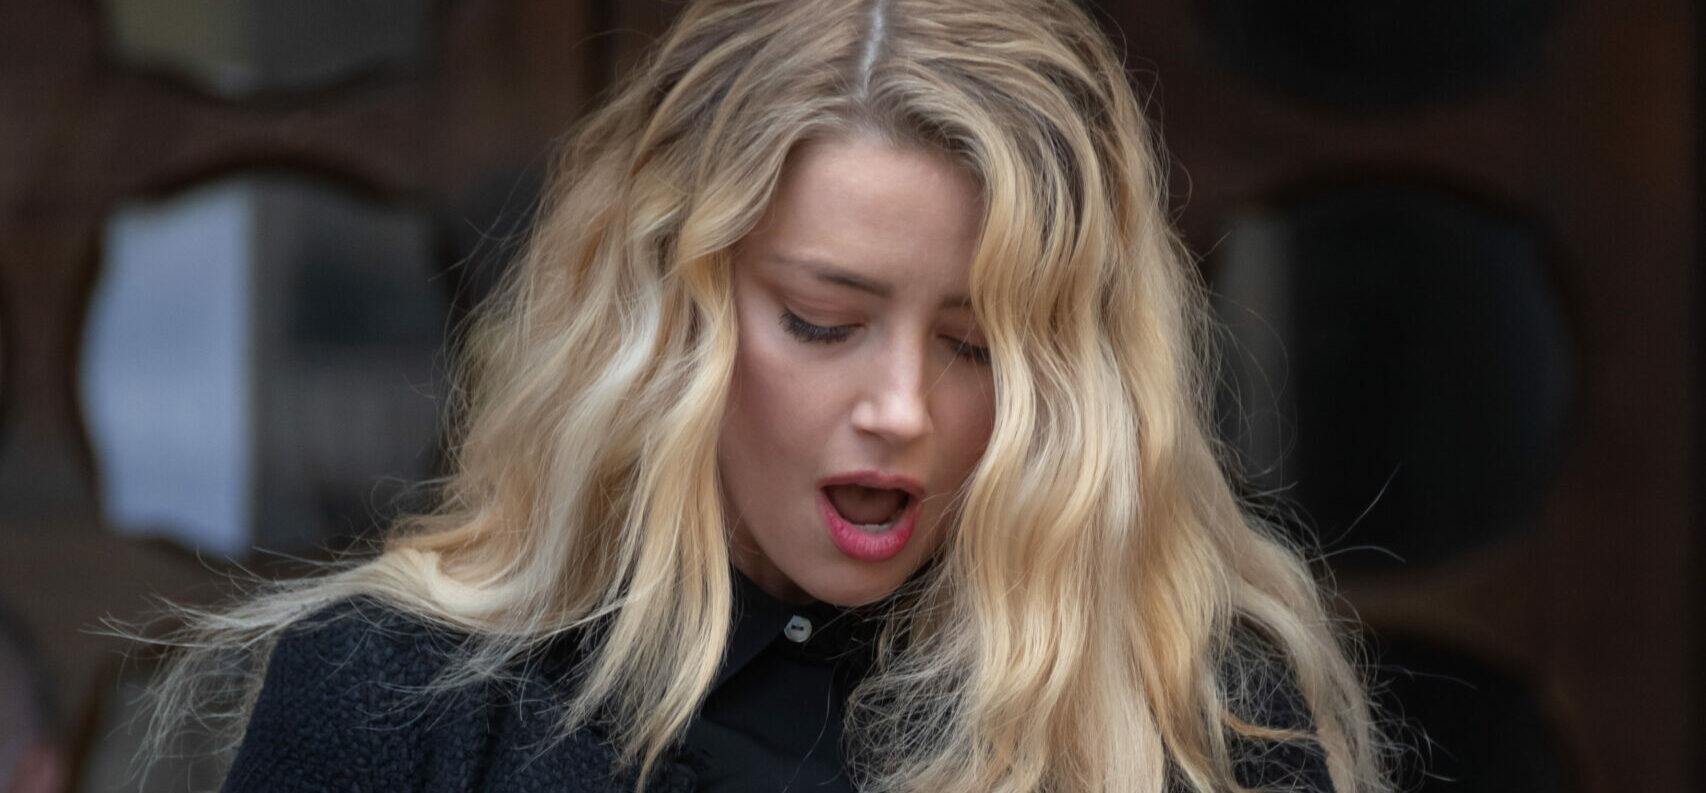 Amber Heard ‘Amber Turd’ Hashtag Takes Center Stage During Johnny Depp Trial